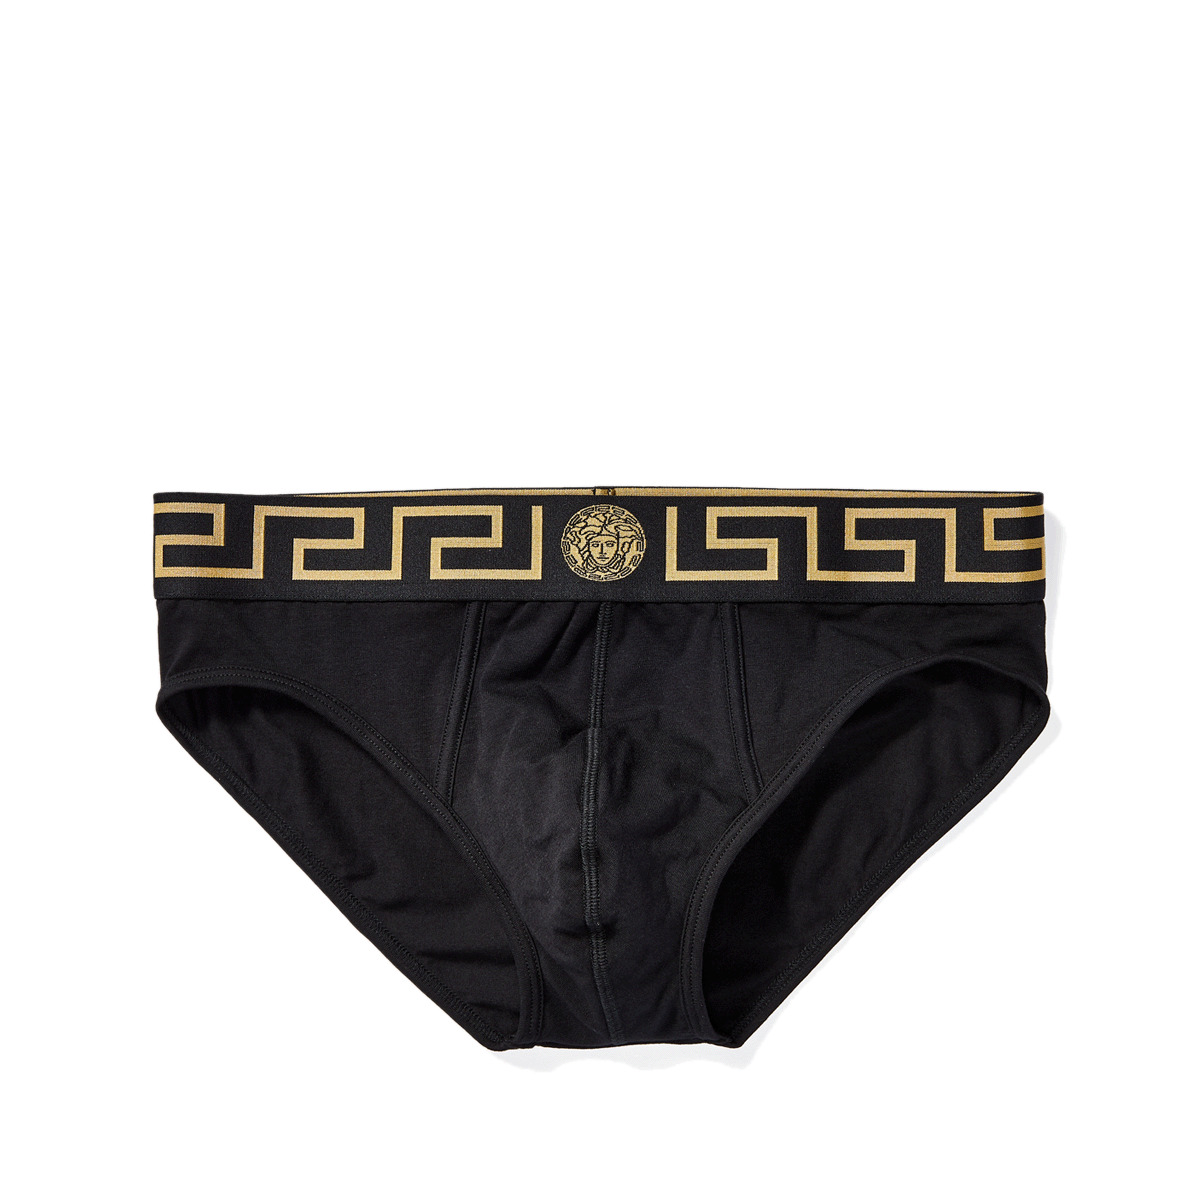 Versace Iconic Brief with Black Band at Zappos.com